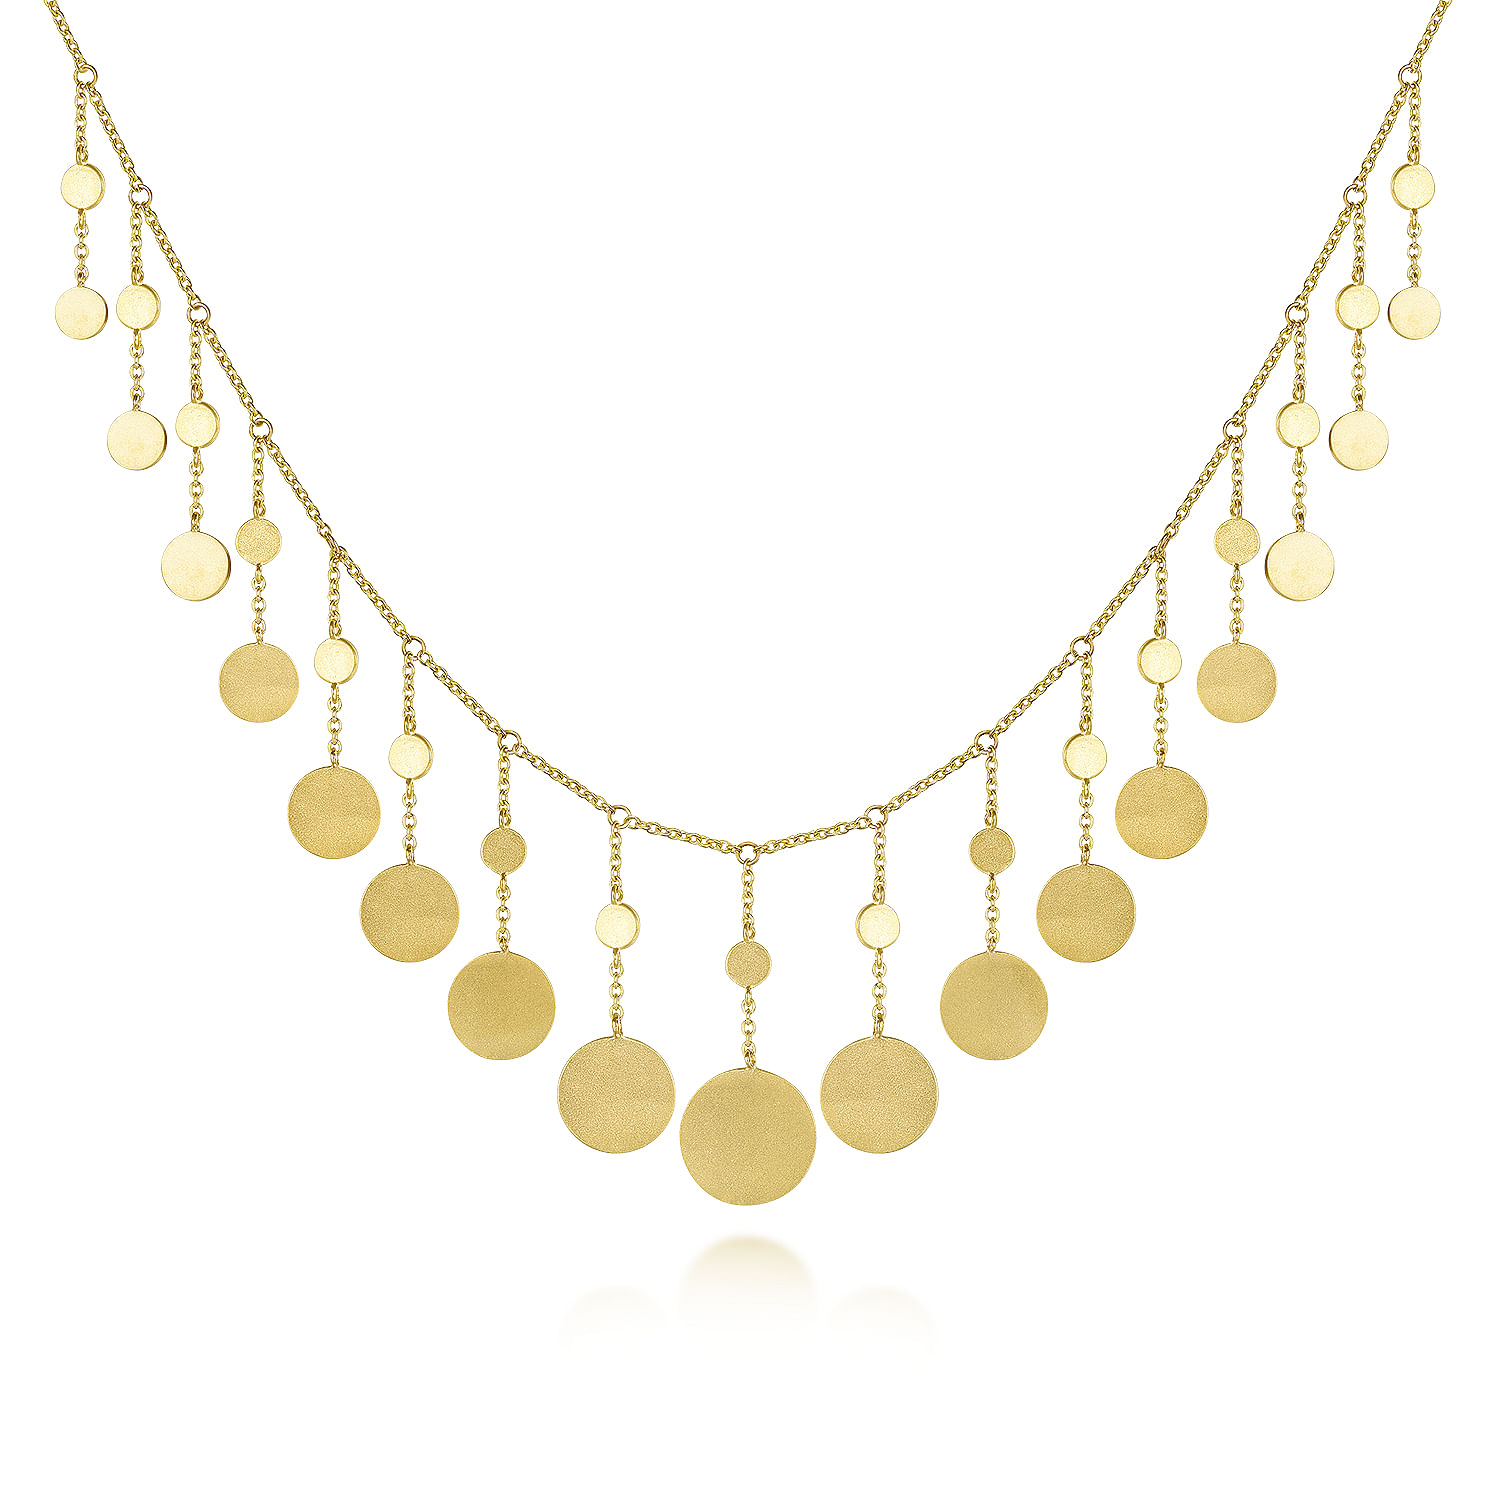 Gabriel - 14K Yellow Gold Necklace with Round Shape Drops